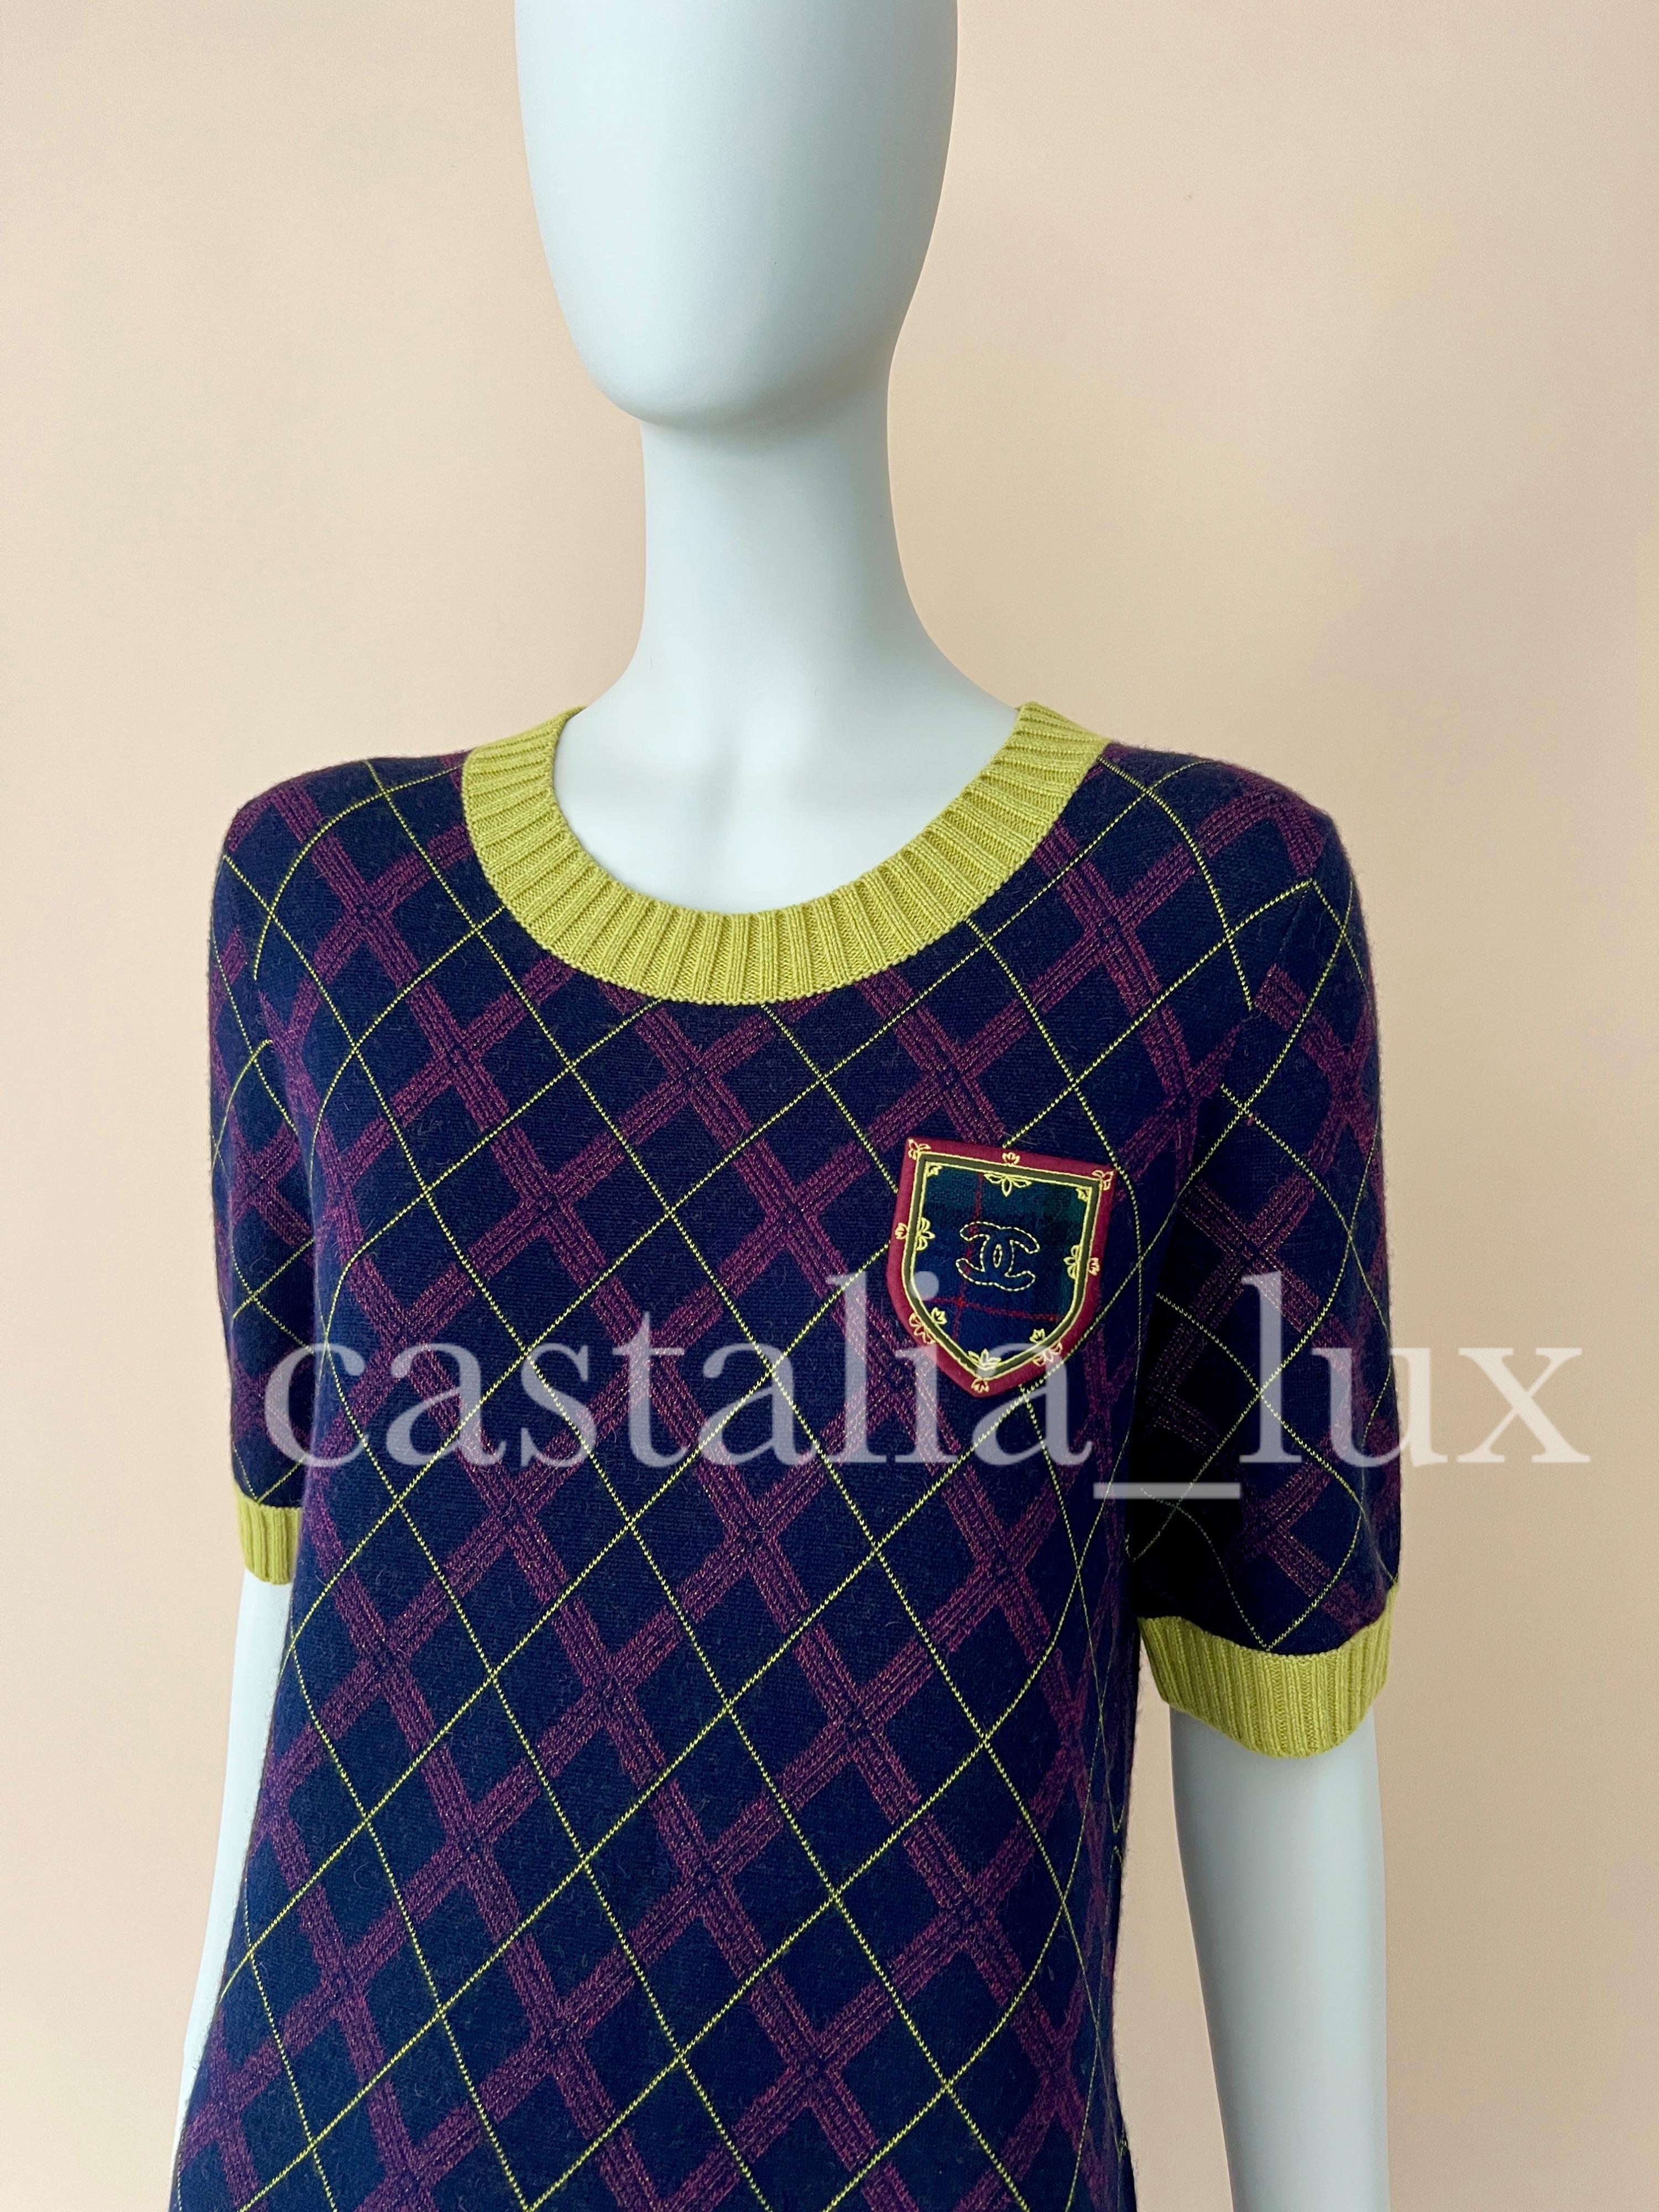 New Chanel cashmere dress with CC logo Patch from Paris / EDINBURGH 2013 Pre-Fall Metiers d'Art Collection.
Size mark 40 fr.